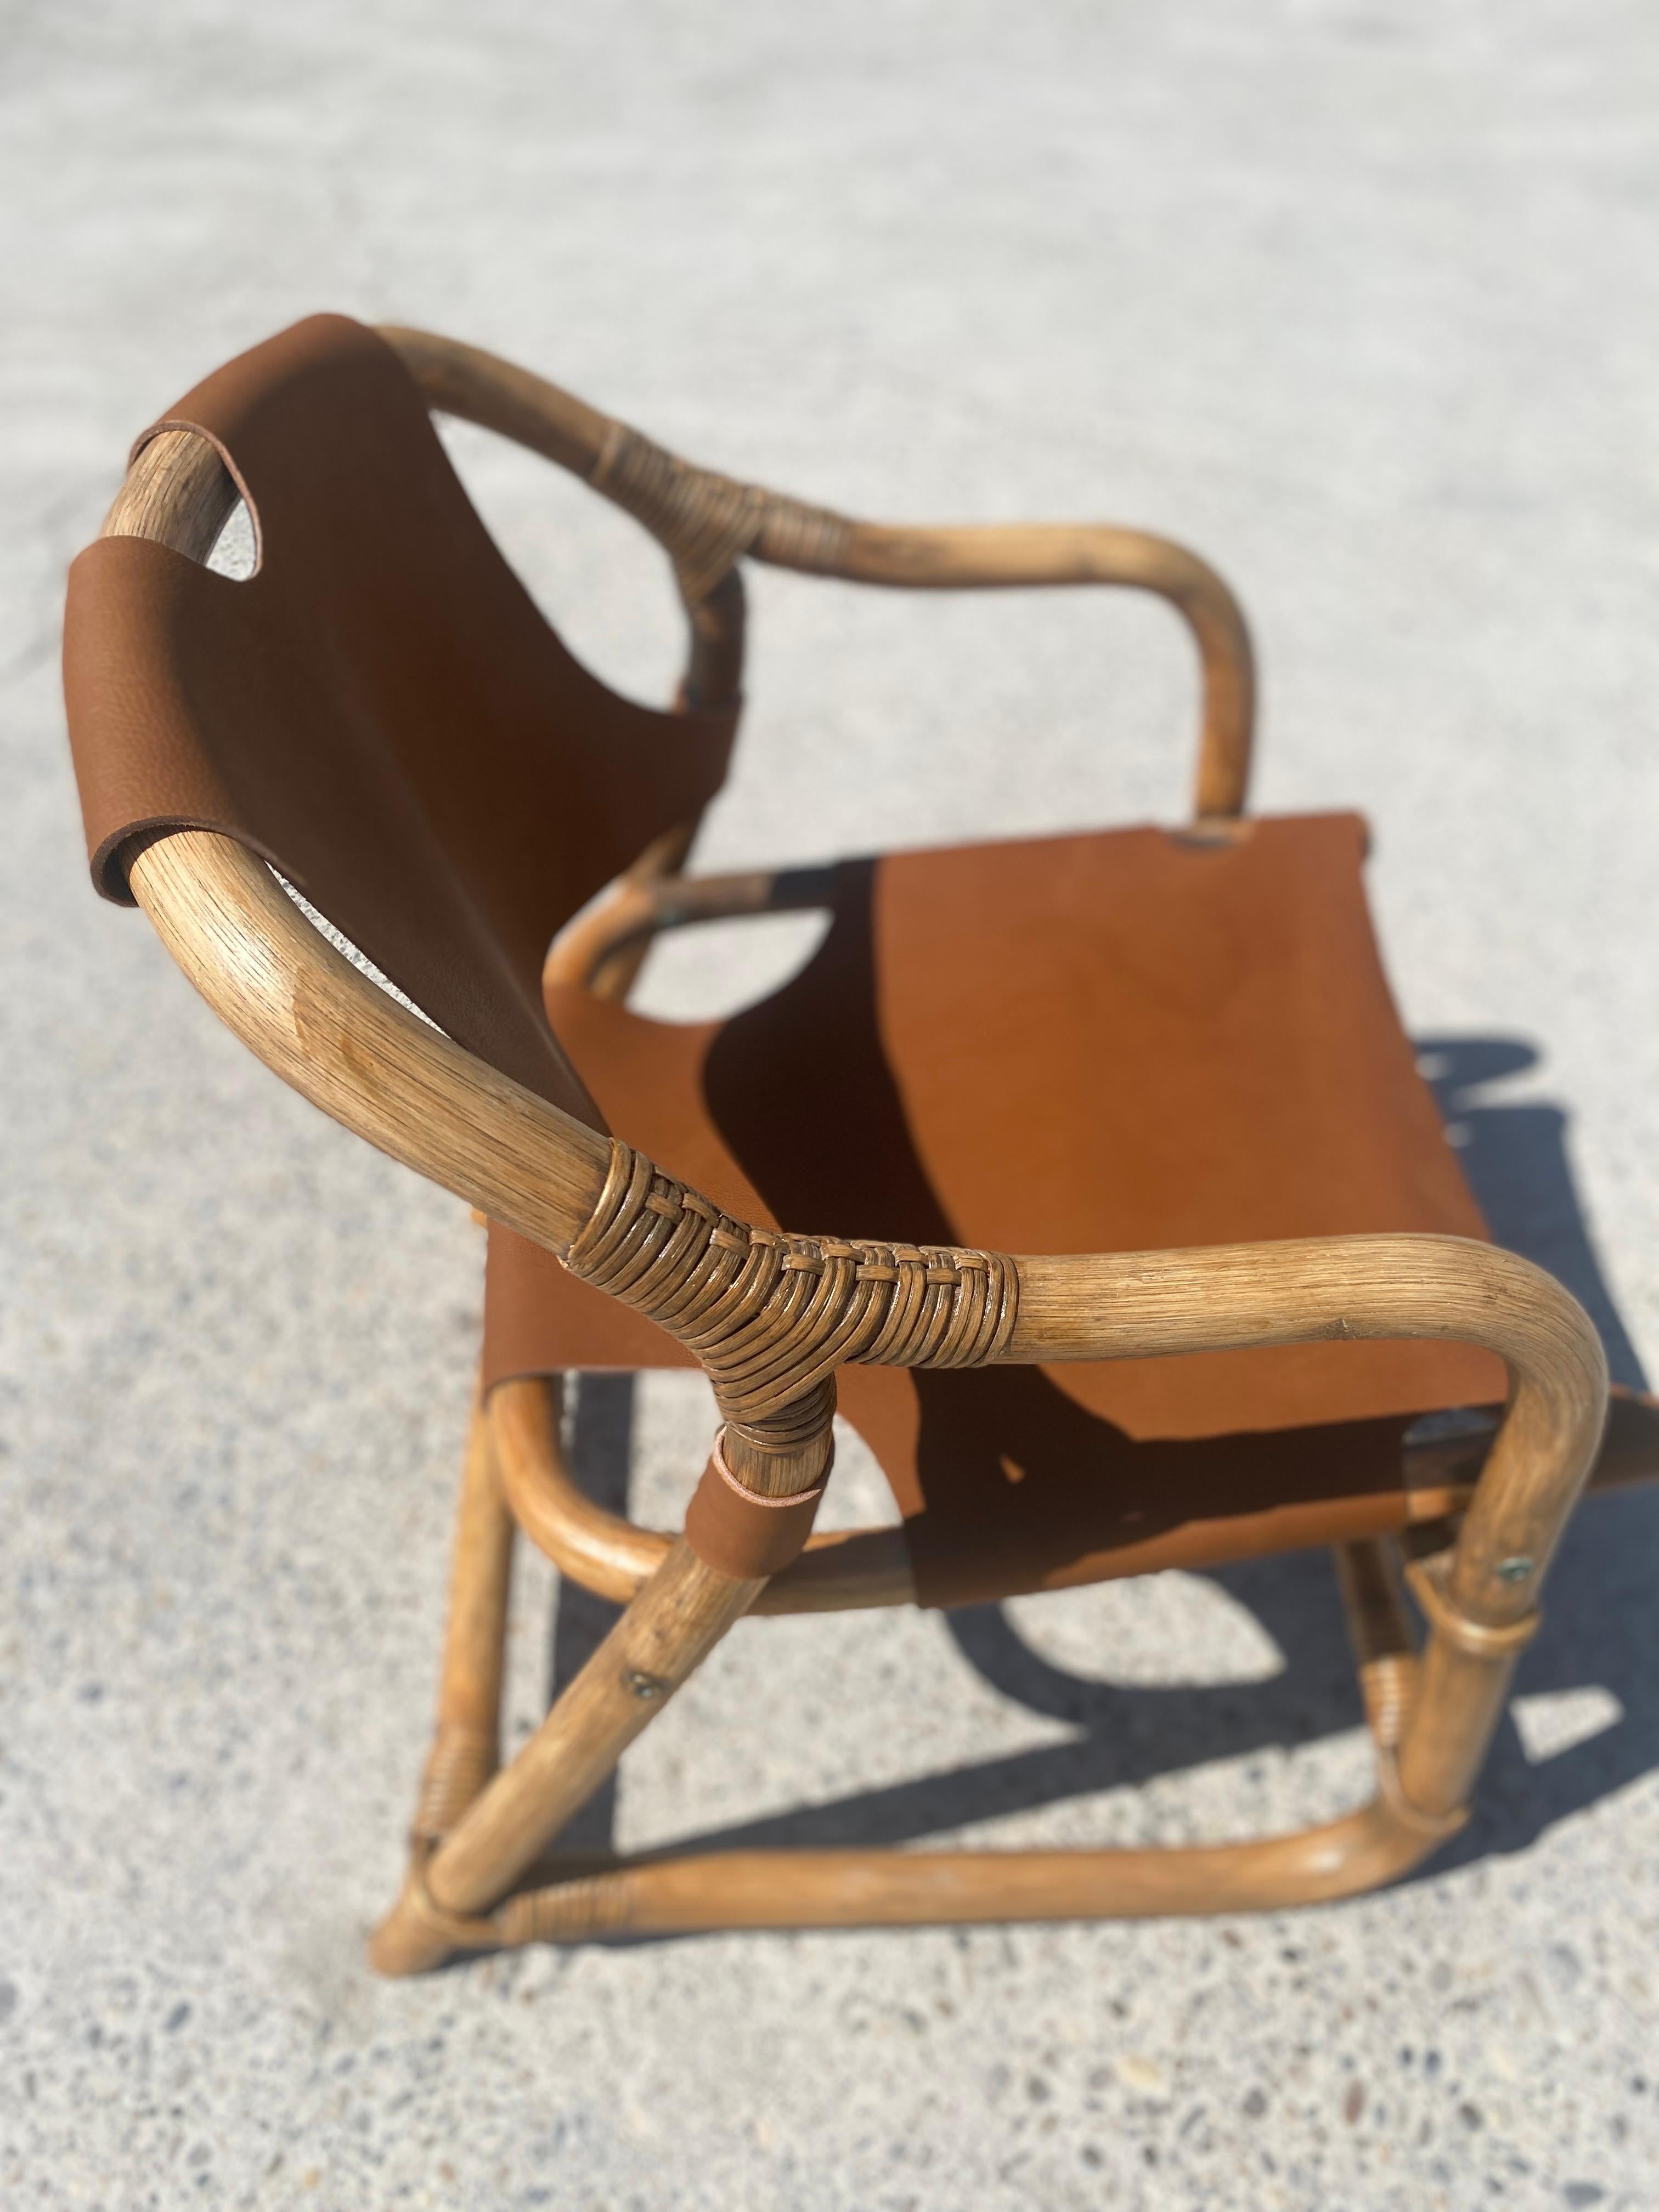 Midcentury Safari Armchair in Bamboo and Leather, Denmark, 1960s For Sale 4